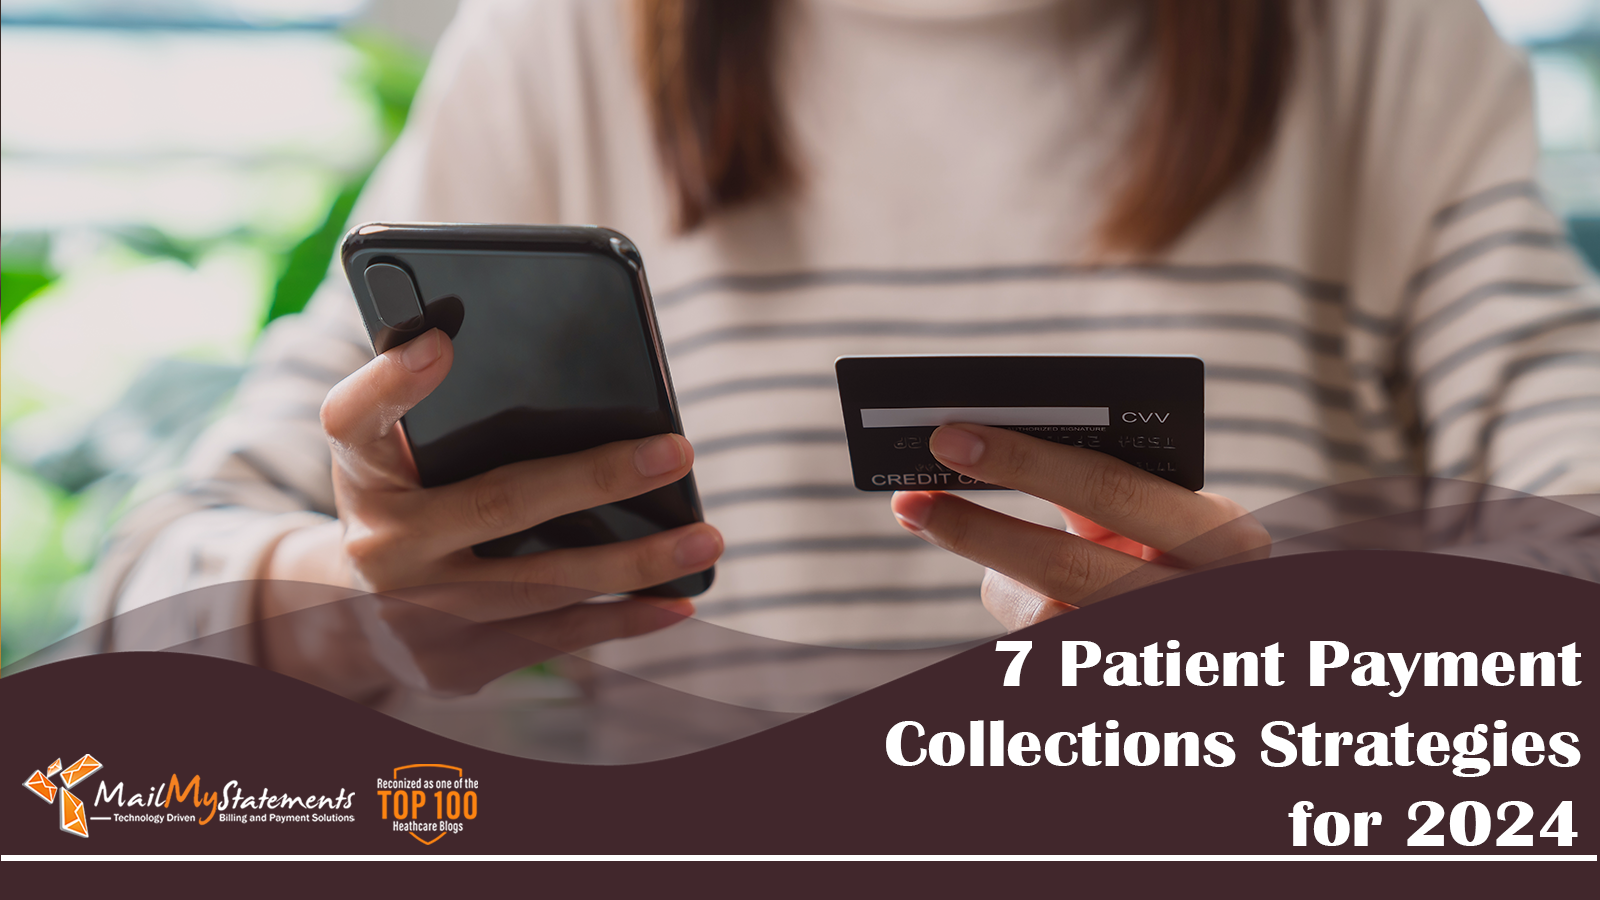 7 Patient Payment Collections Strategies for 2024